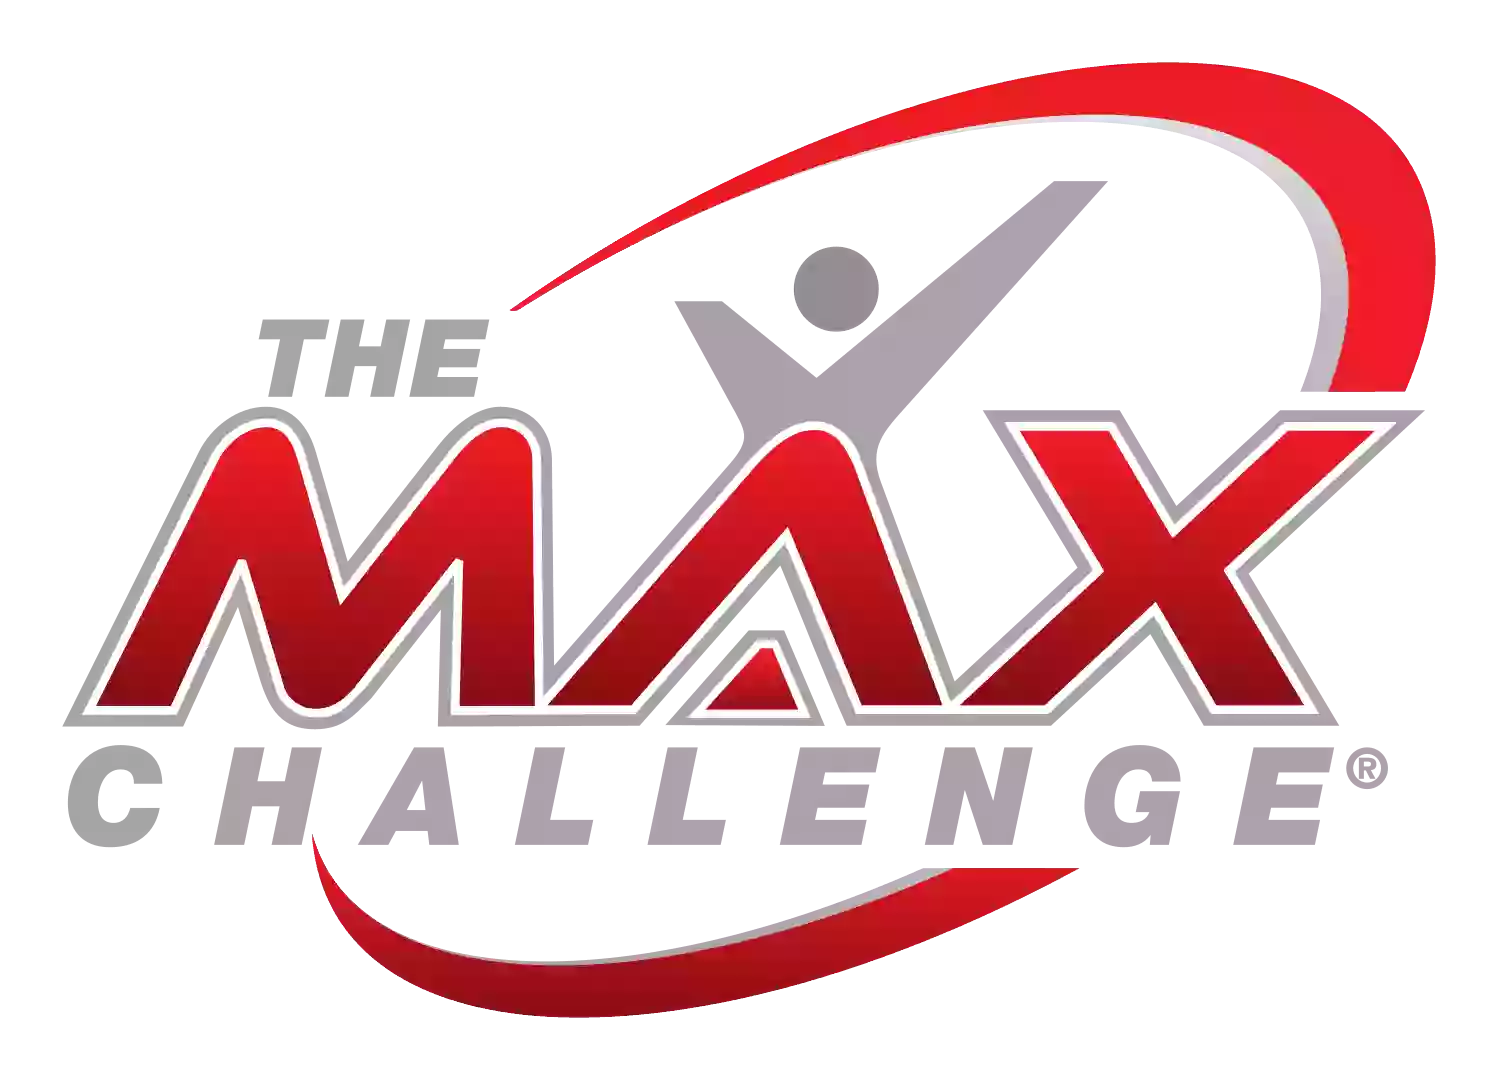 THE MAX Challenge of South Windsor